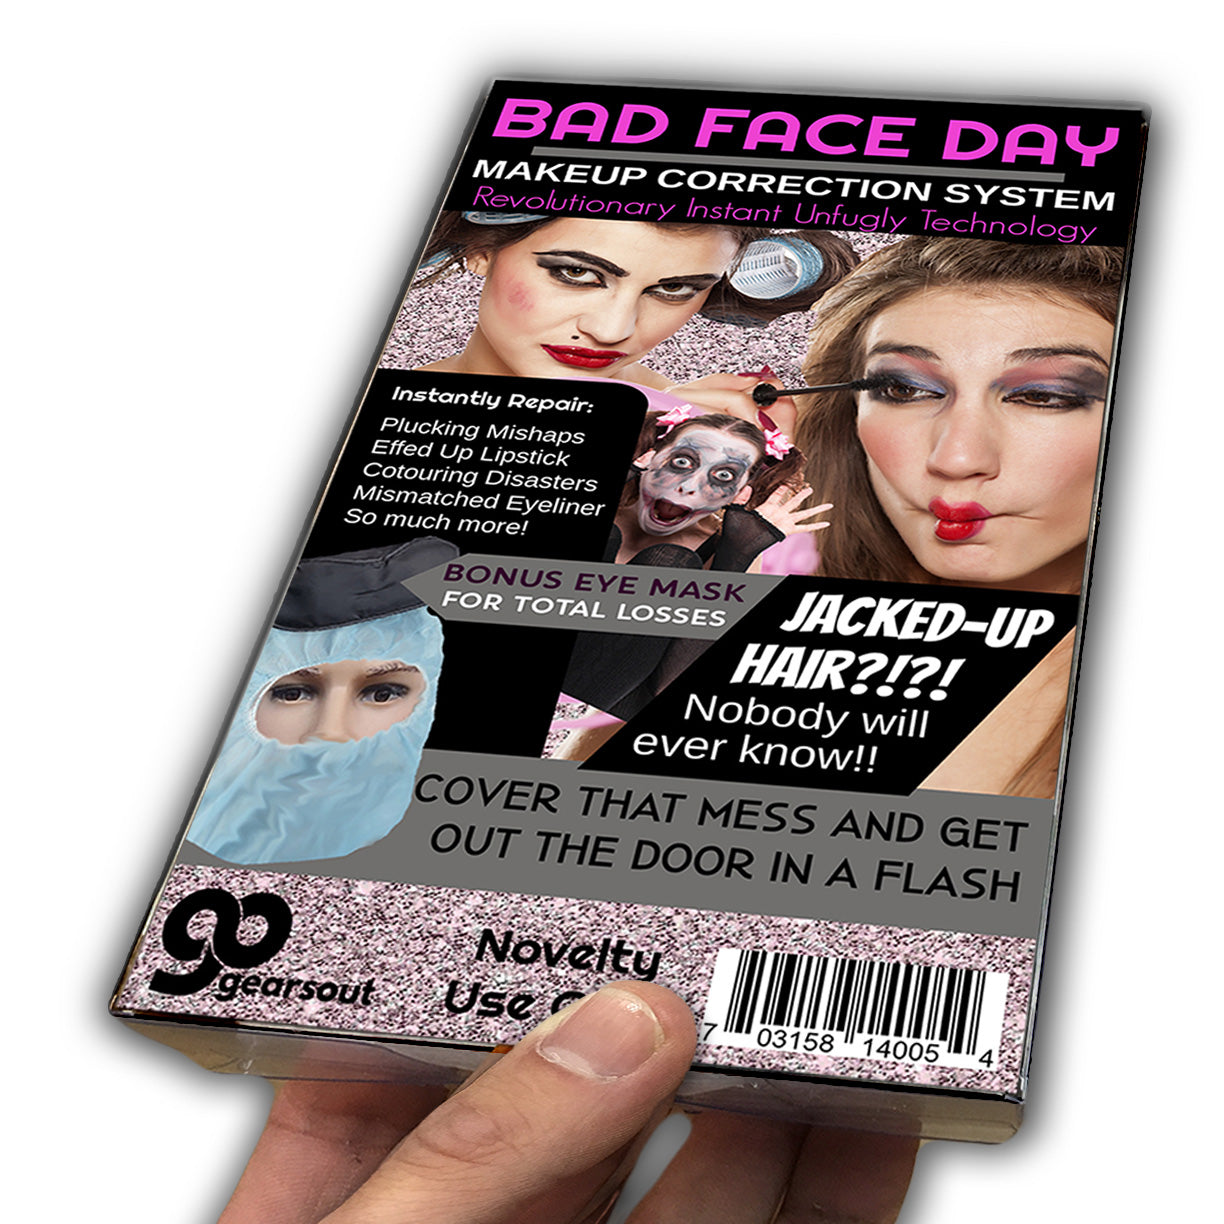 Bad Face Day Mask